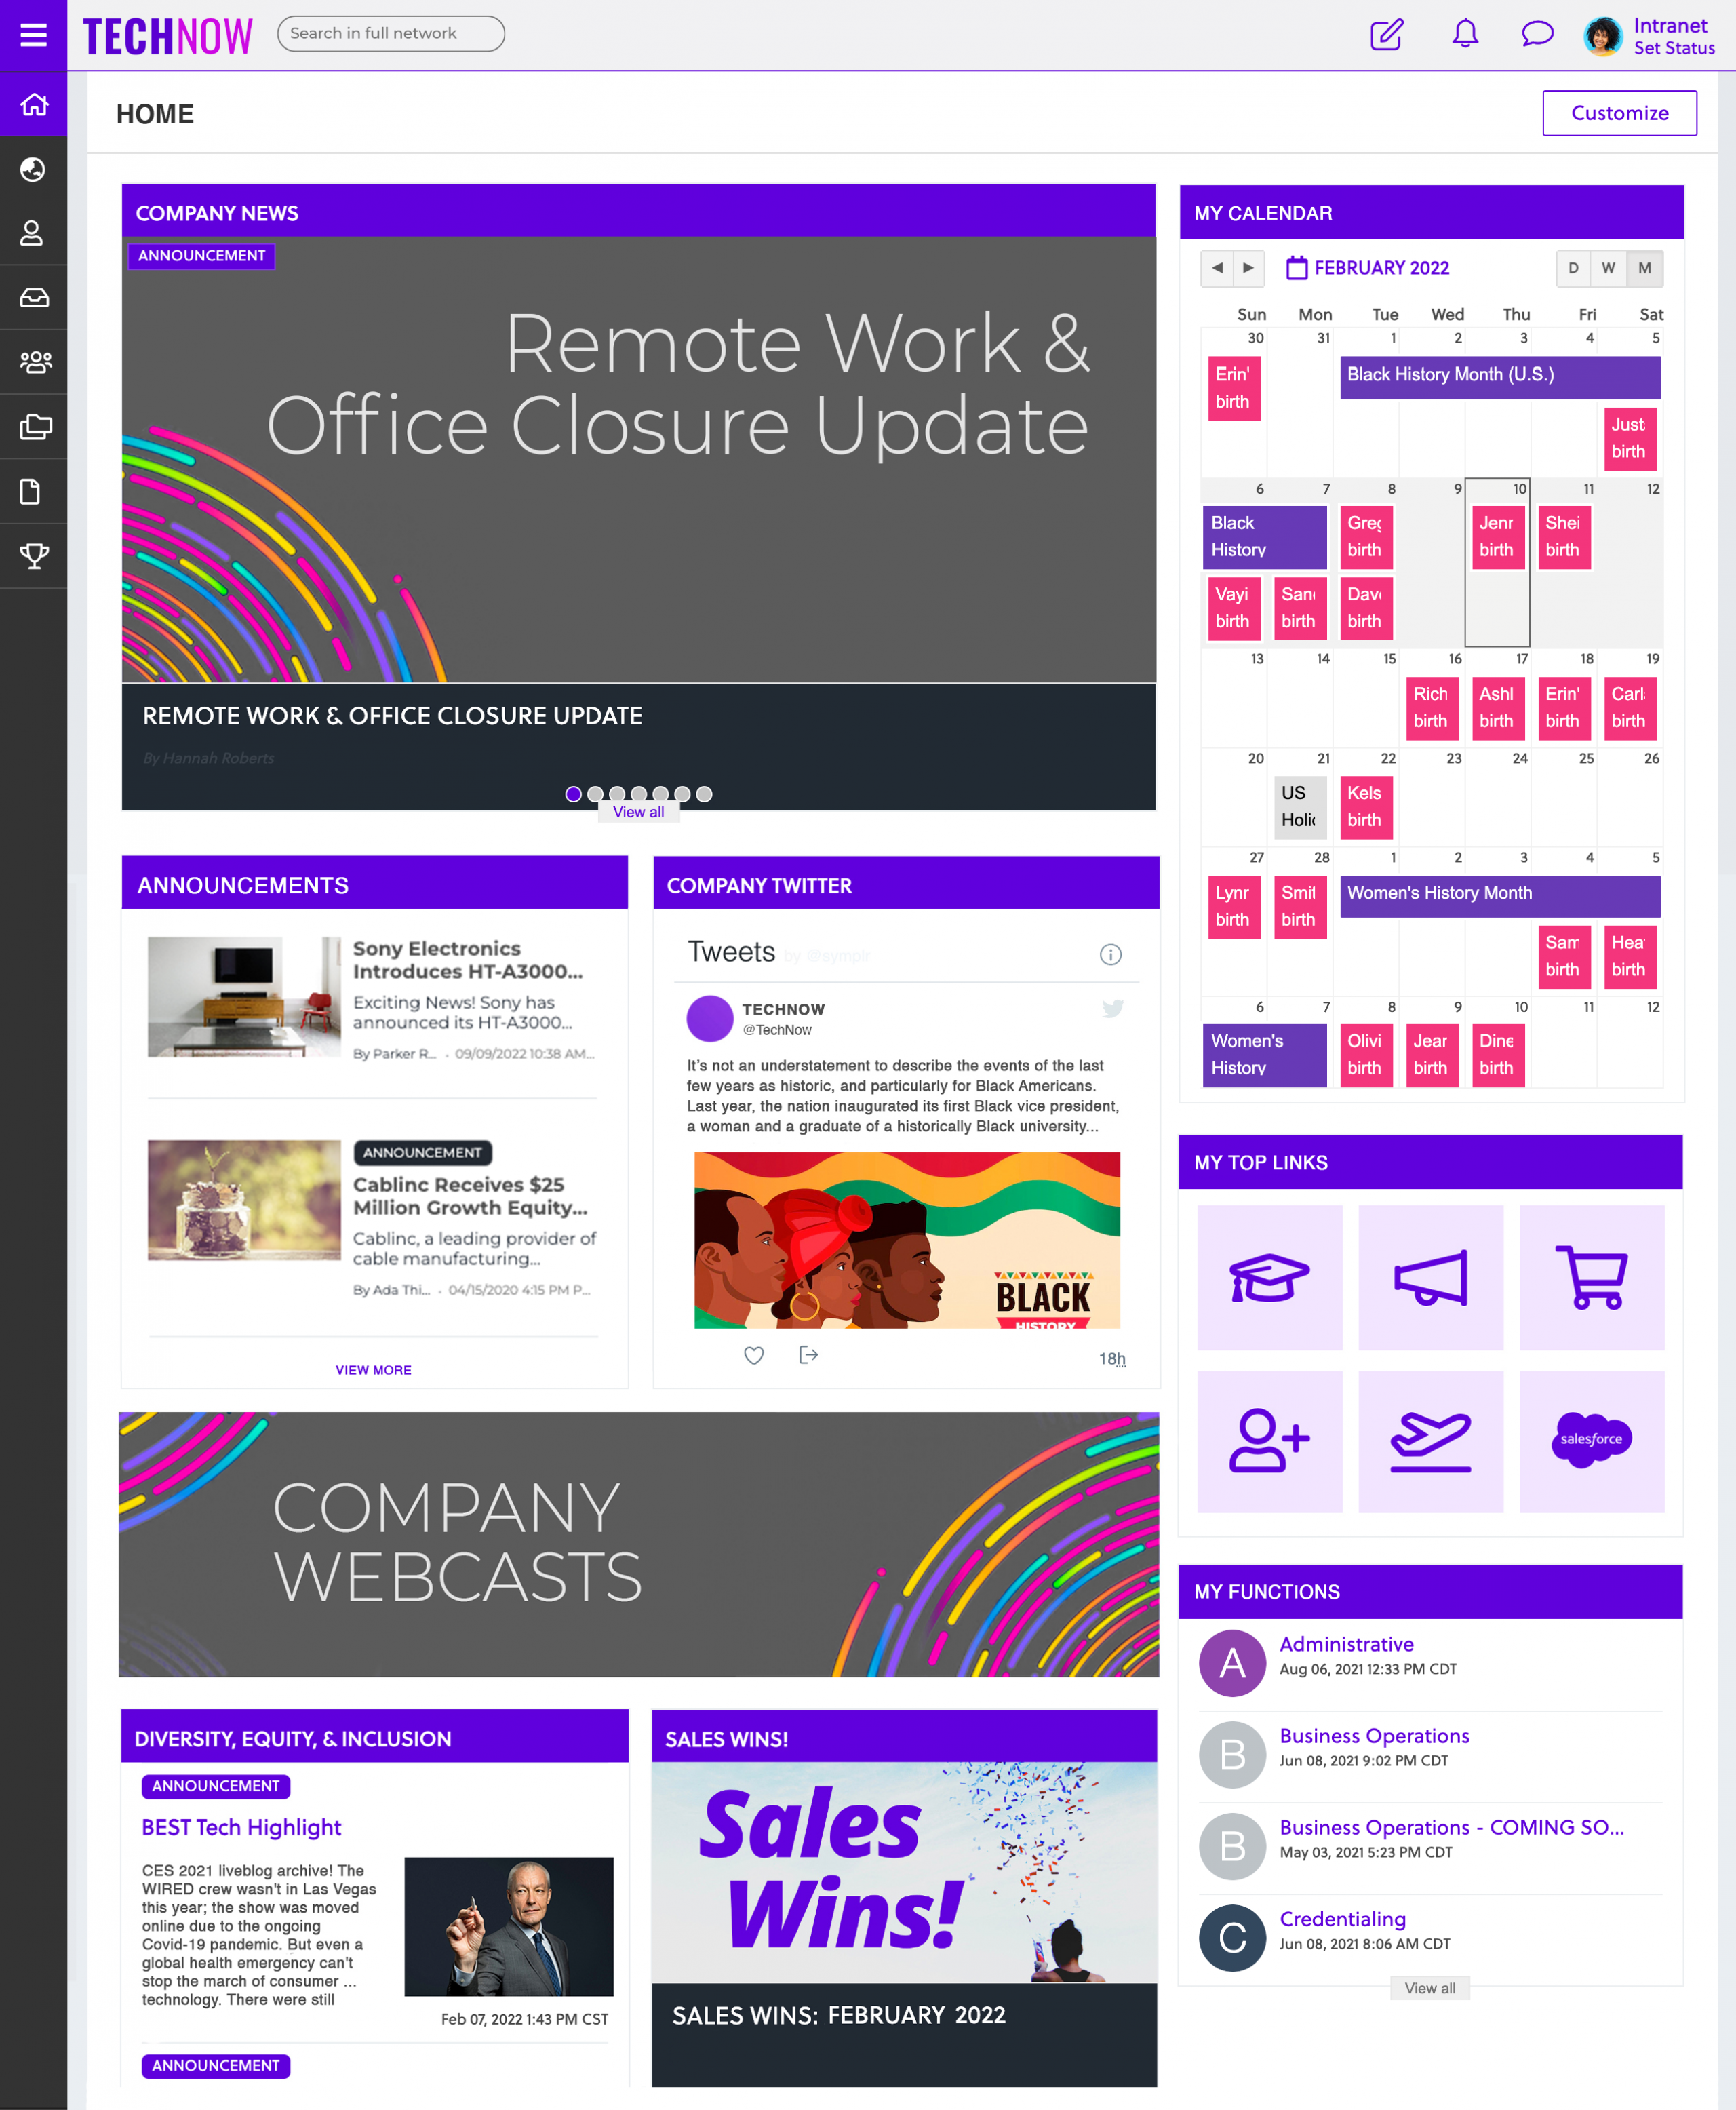 Intranet design example for tech company 